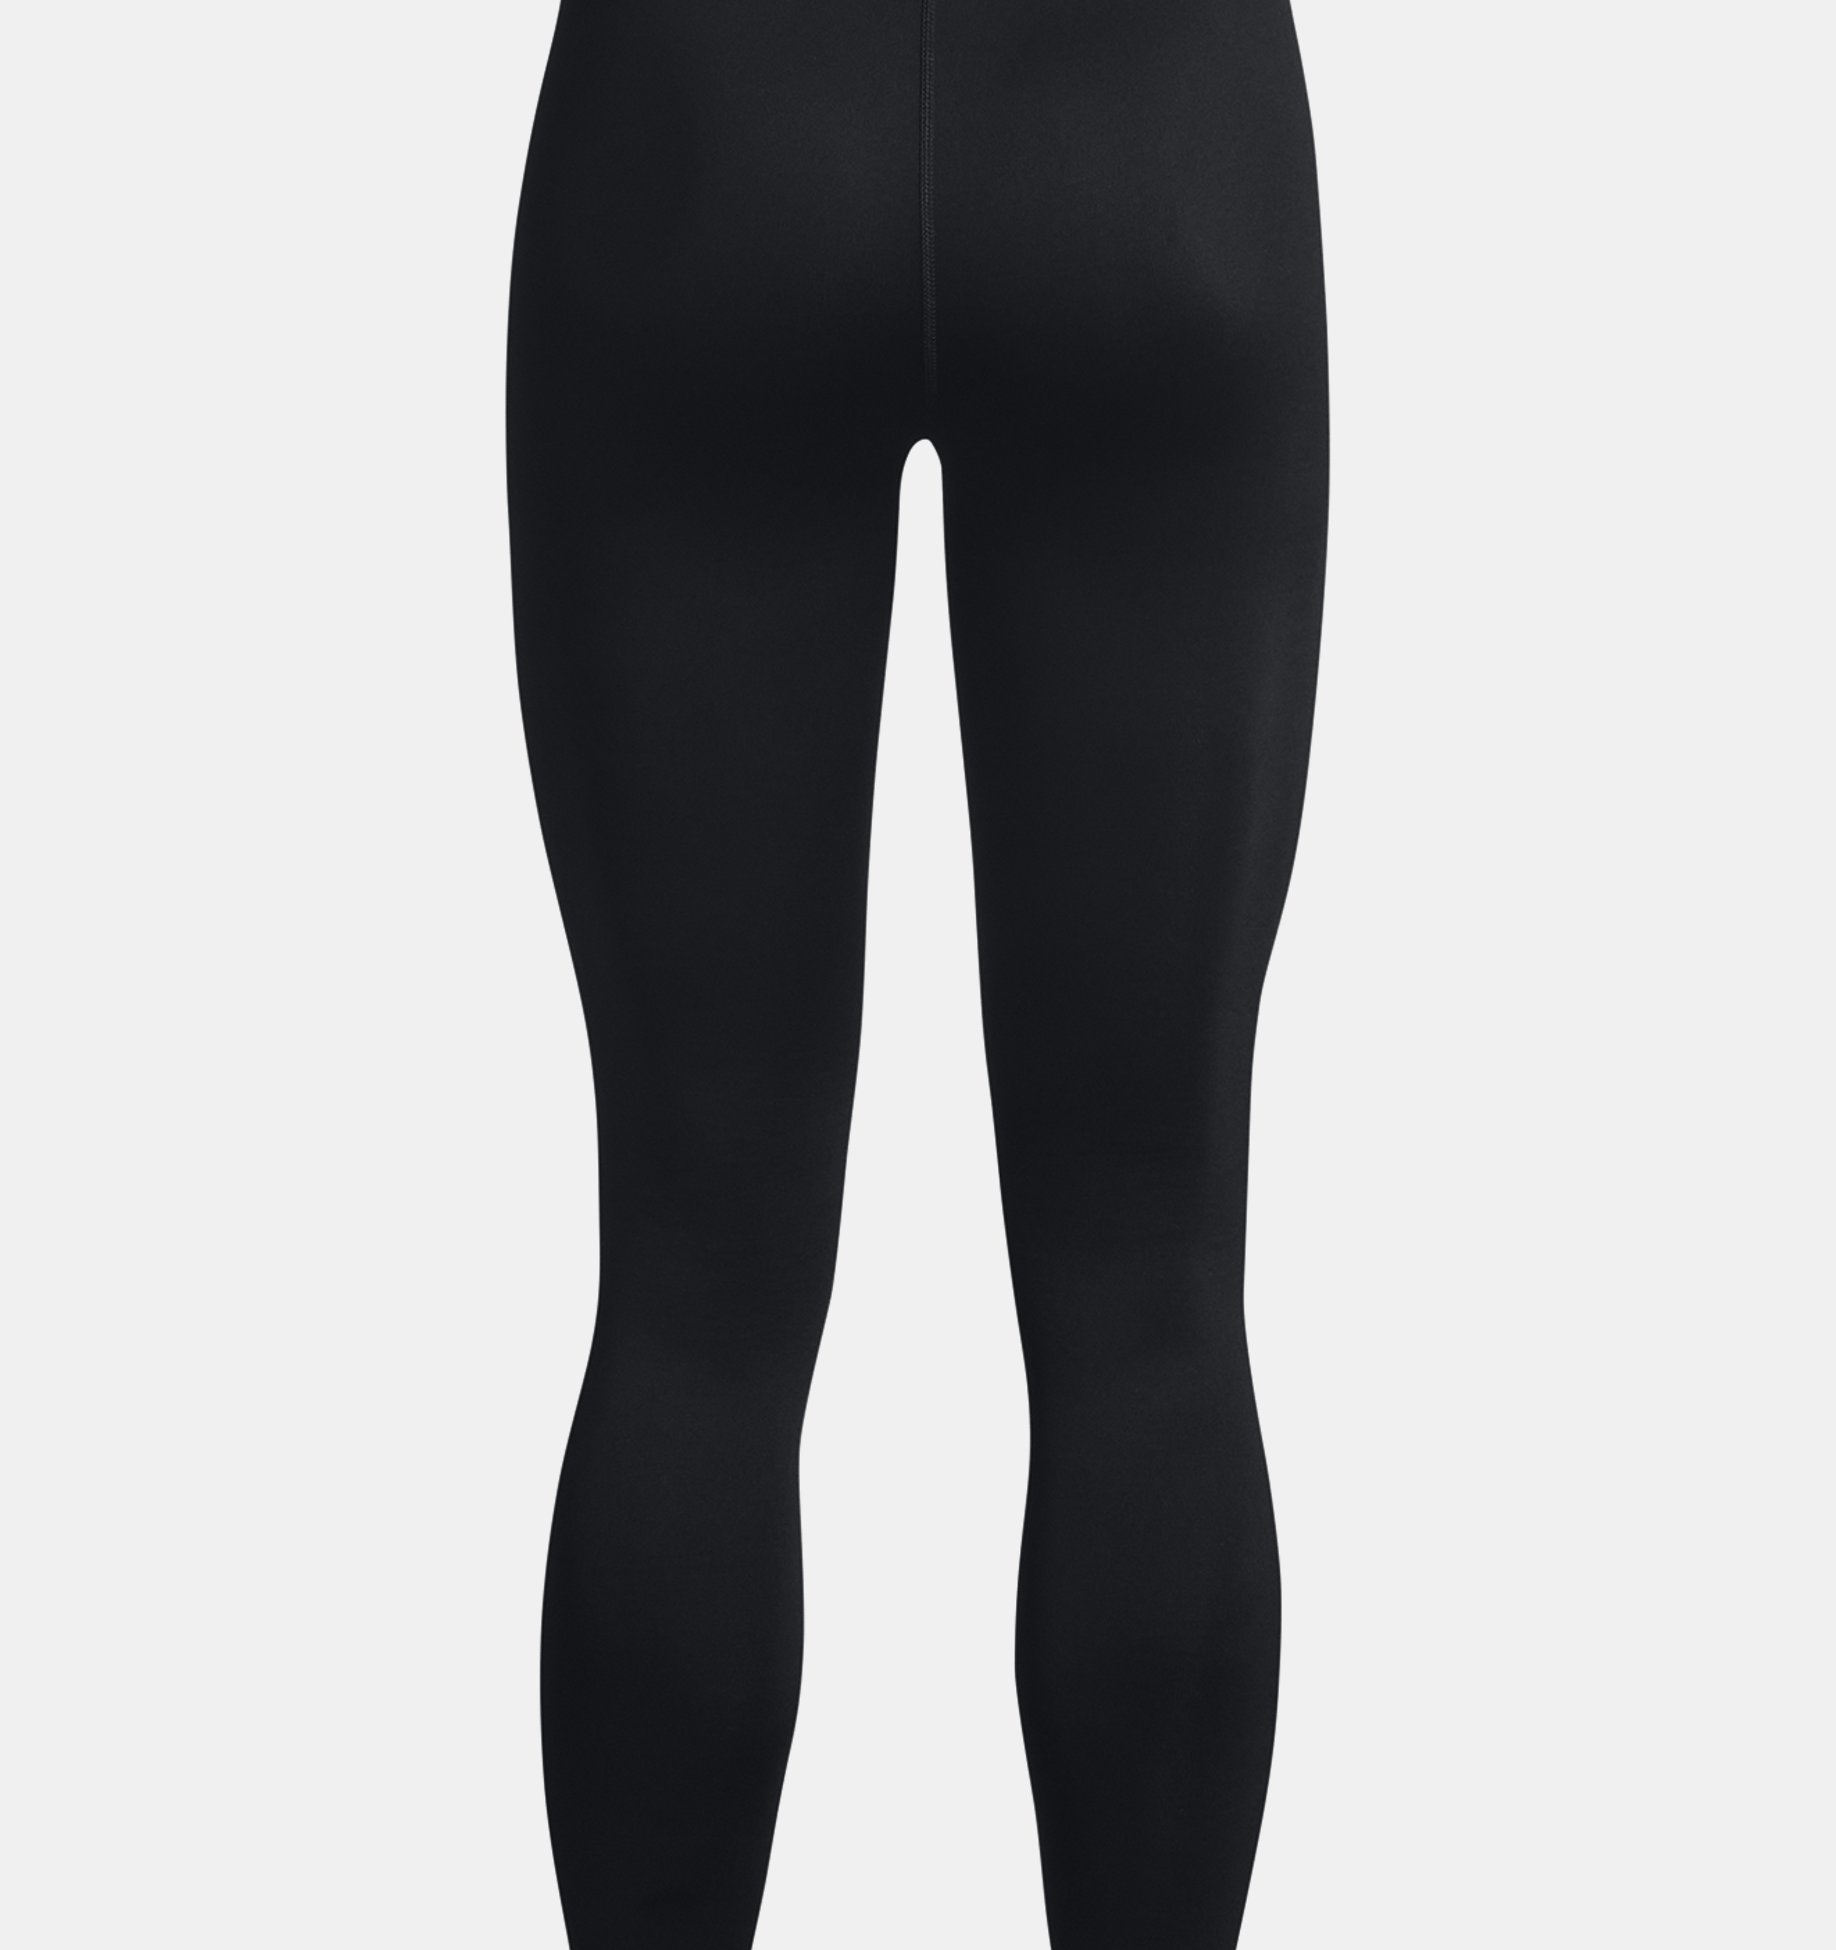 Under Armour ColdGear Leggings Tempered Steel/Reflective 1373833-558 - Free  Shipping at LASC